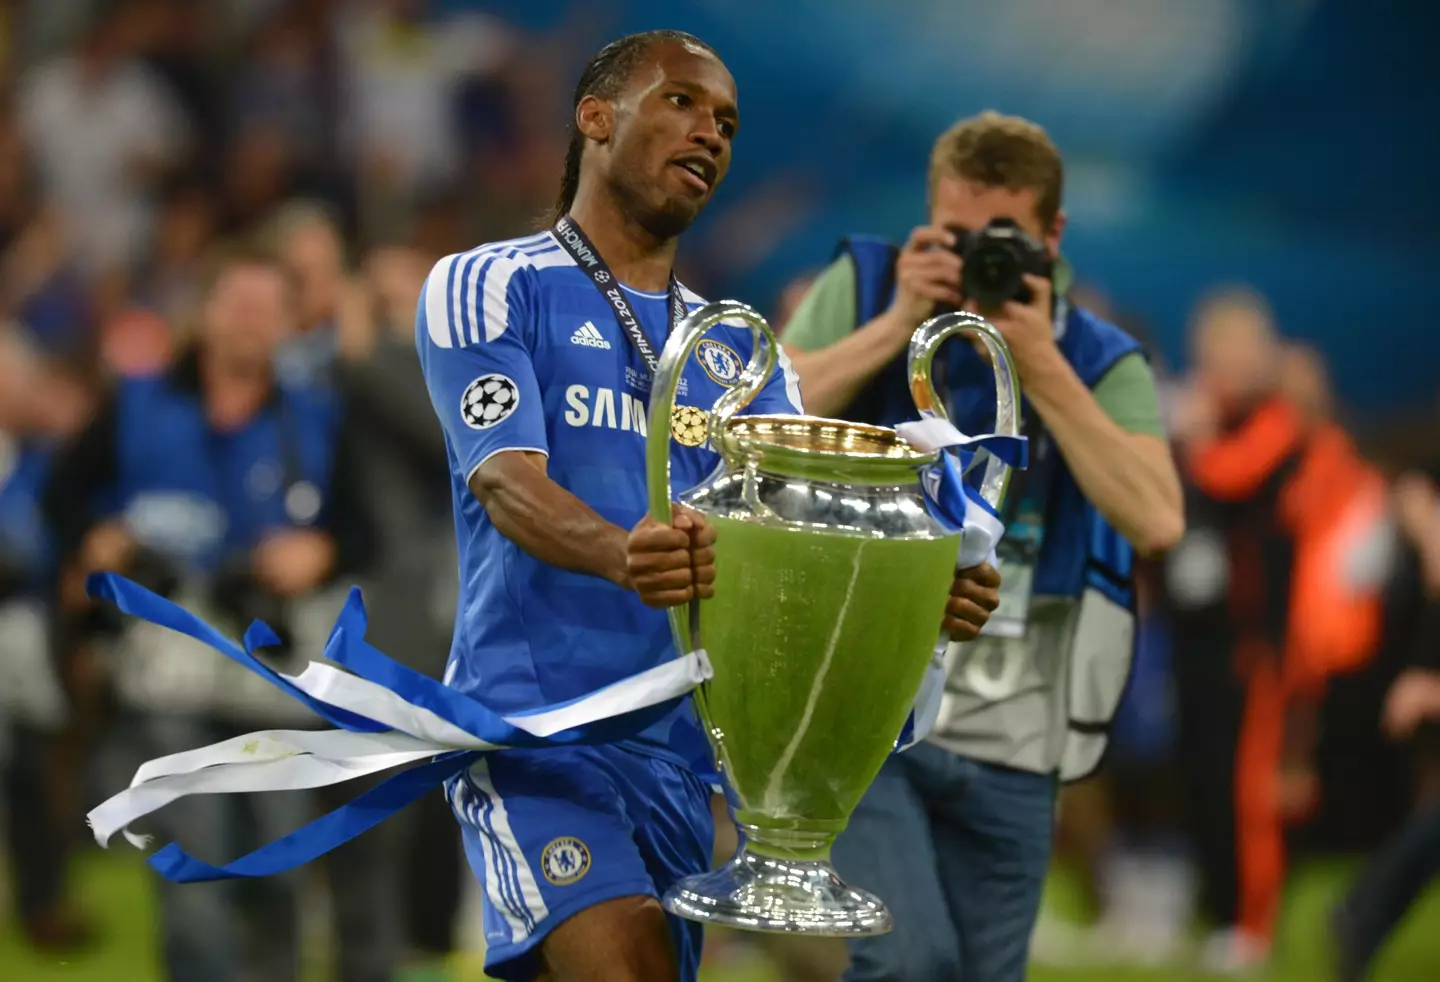 Drogba would go on to win the Premier League four times and the Champions League after joining Chelsea (Image: PA)